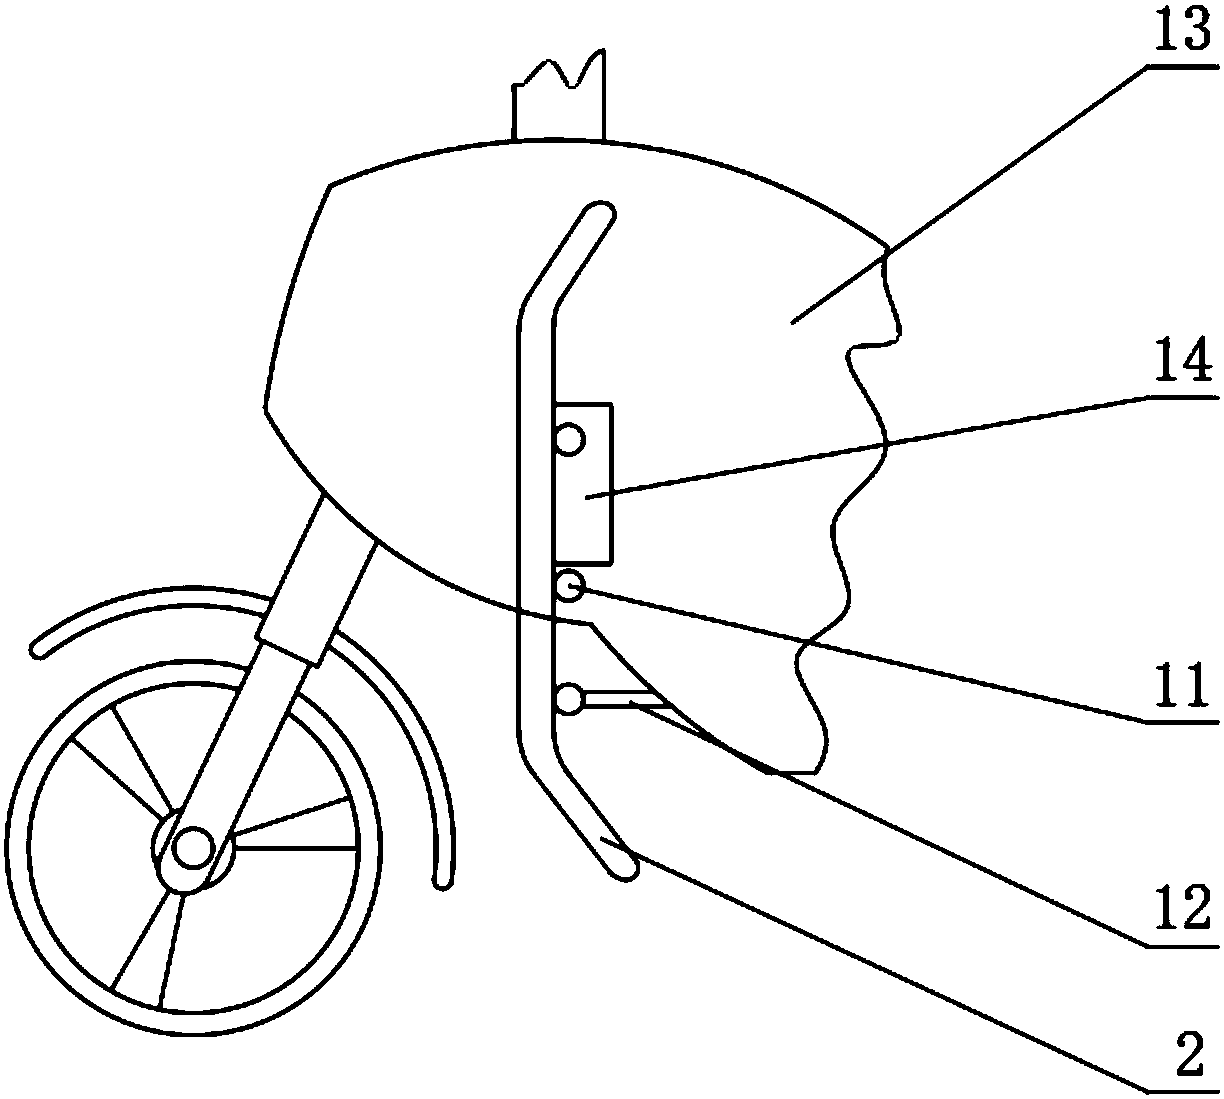 Windproof device for motorcycle